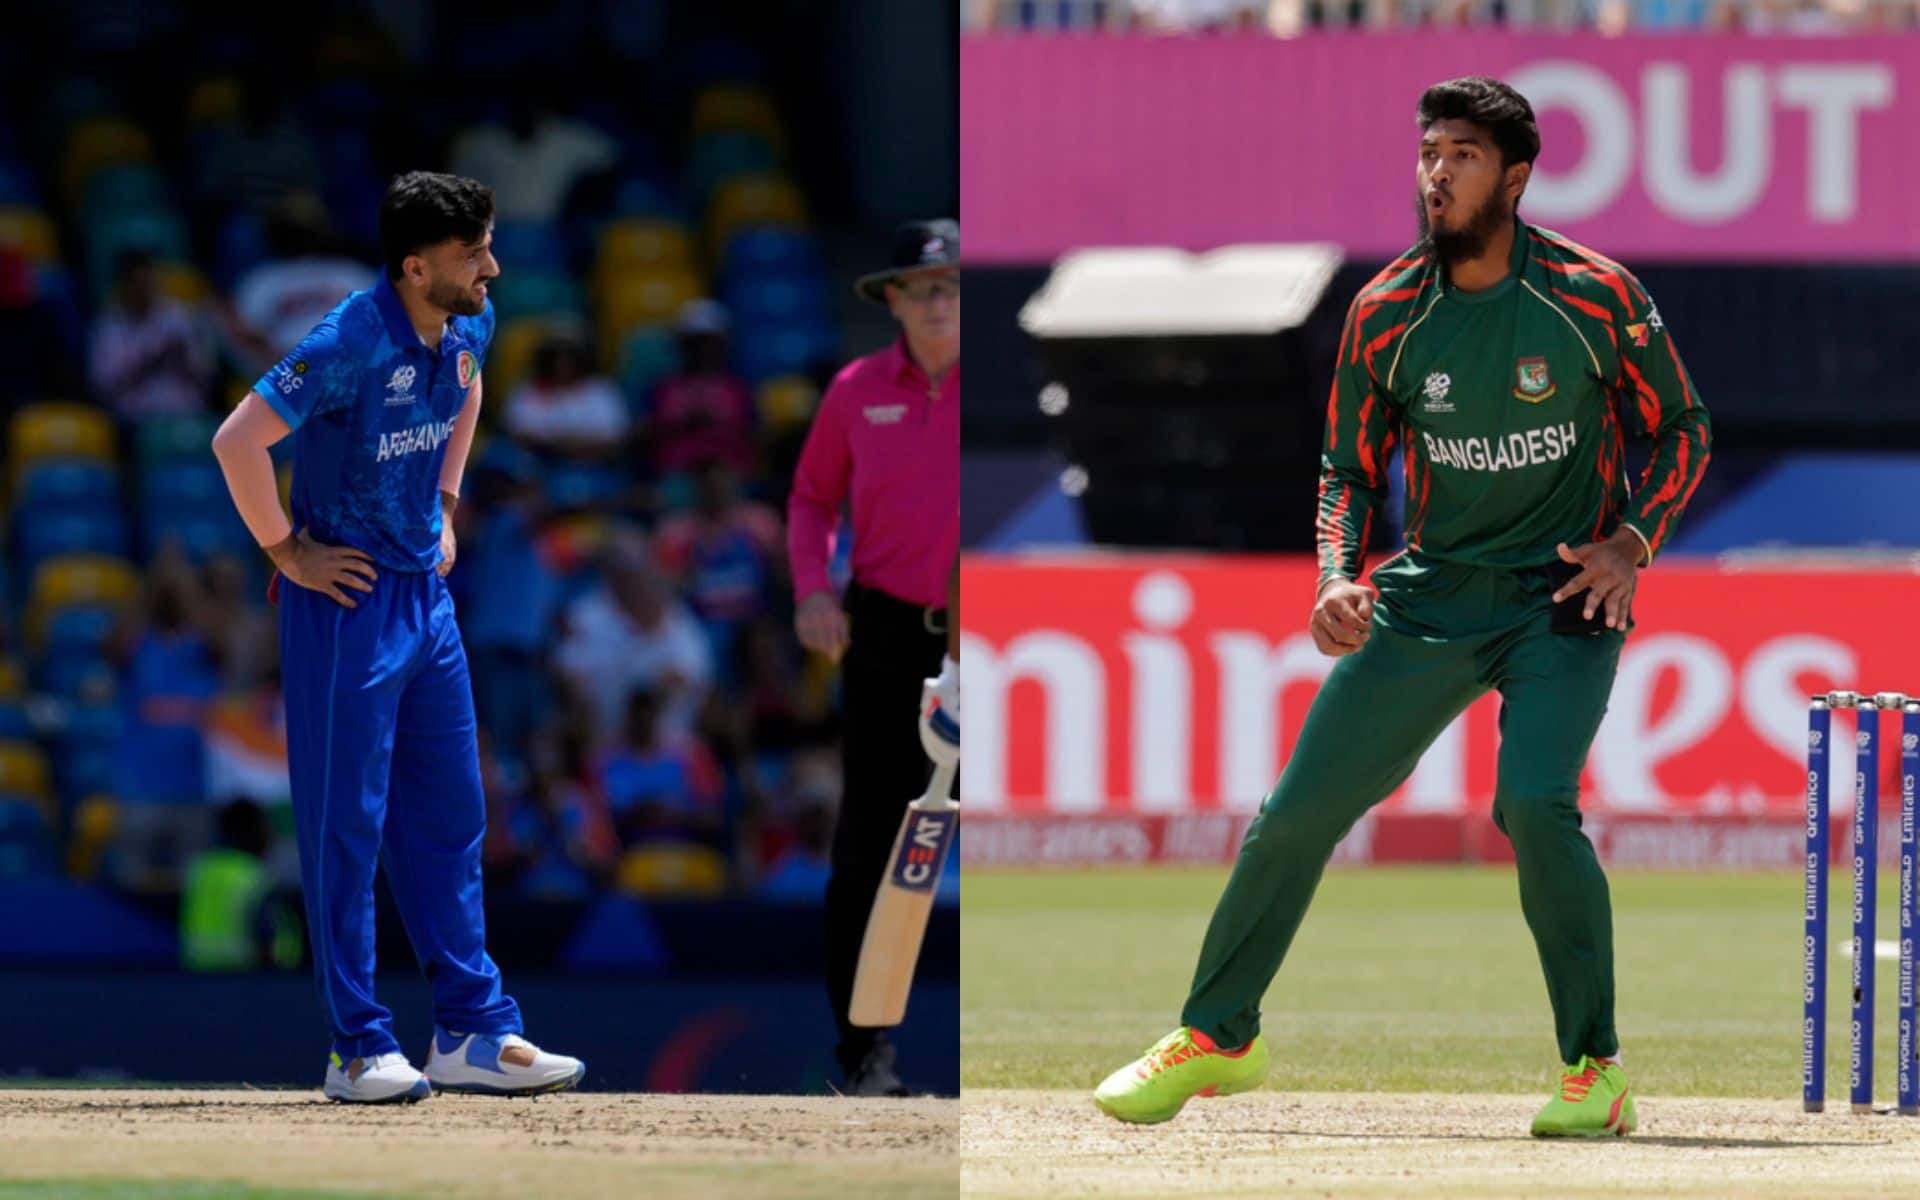 Farooqi and Rishad will be crucial for their teams in the match [AP Photos]